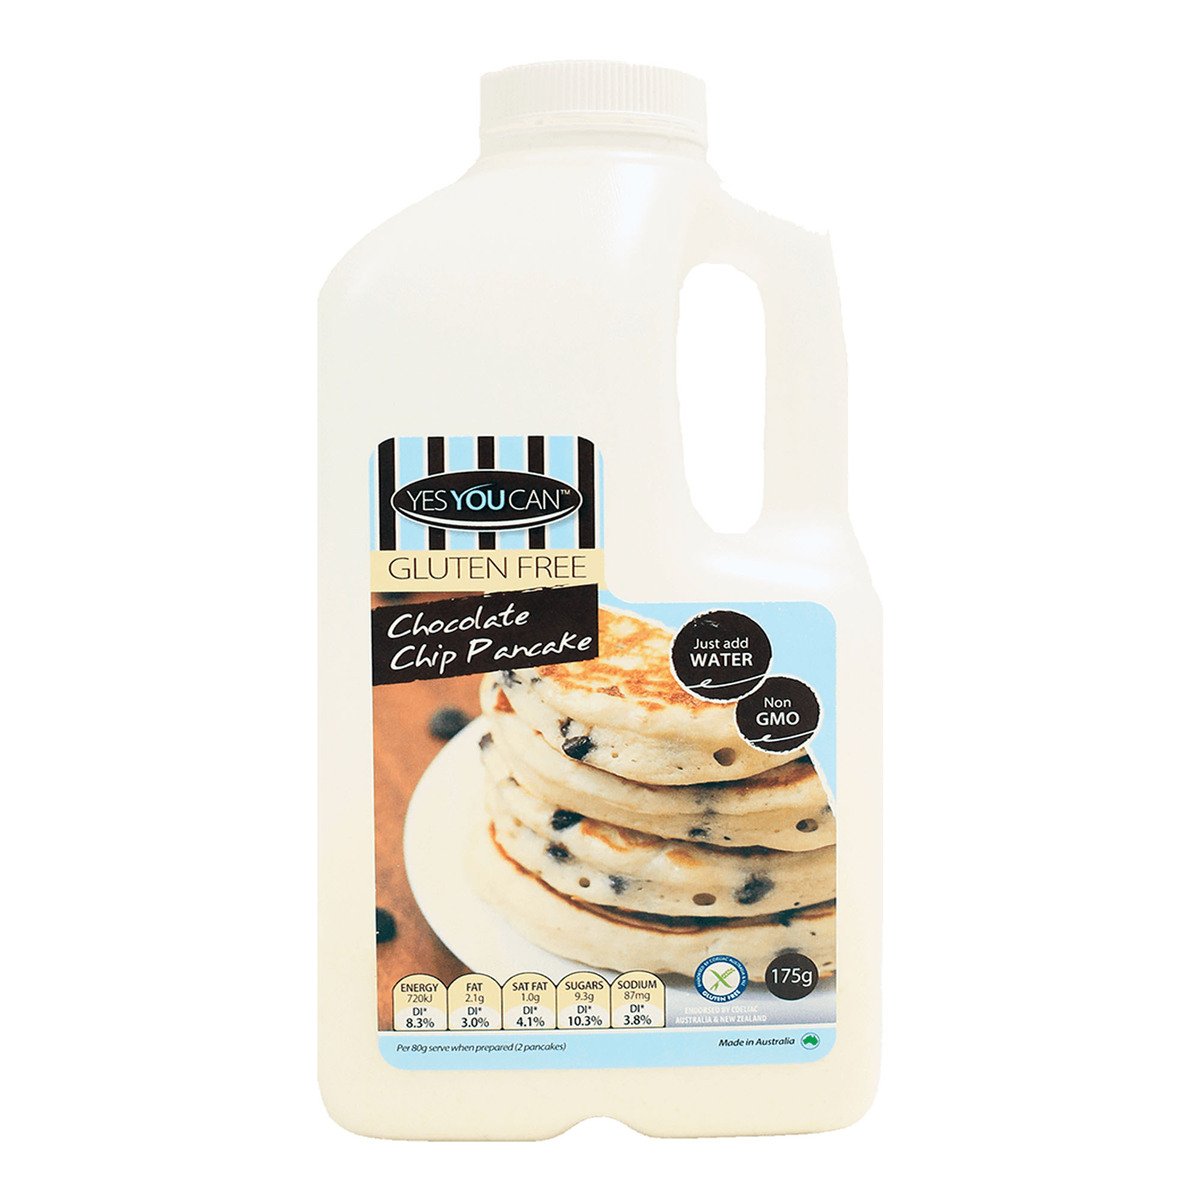 Yes You Can Gluten Free Chocolate Chip Pancake 175g